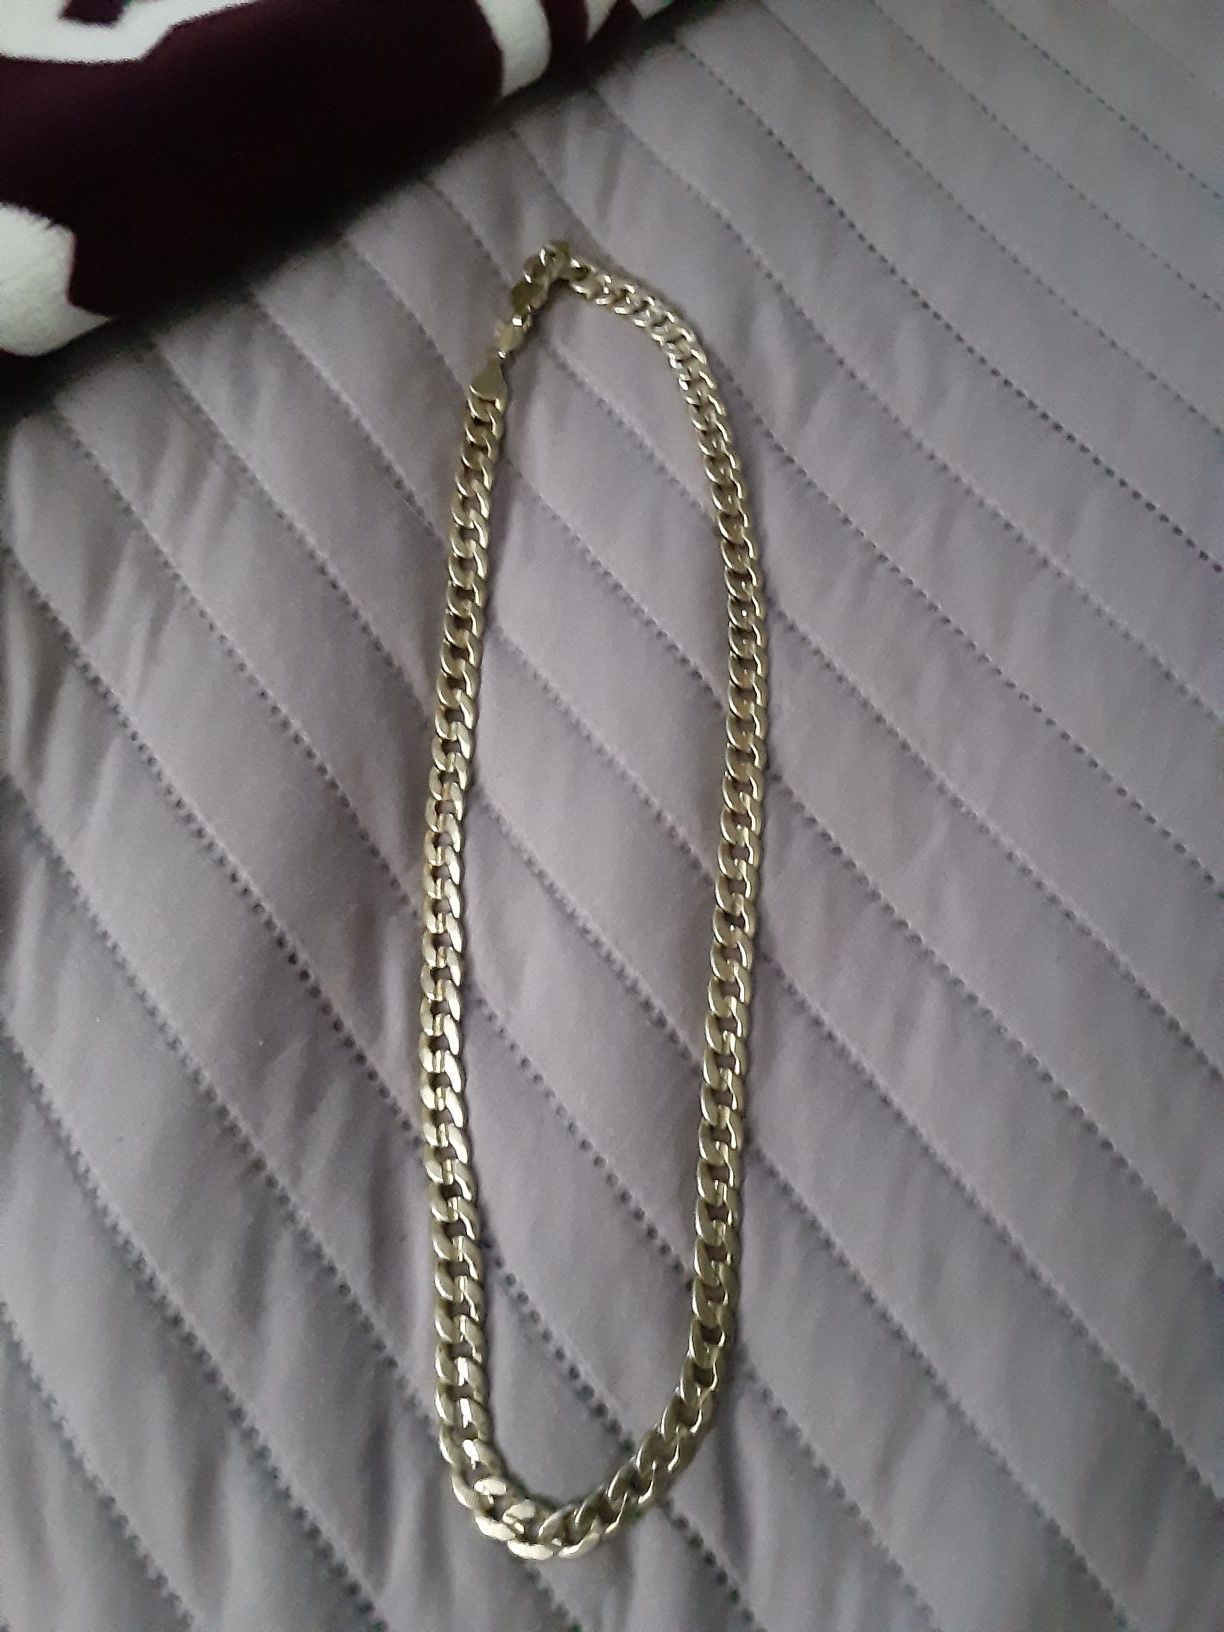 18k gold plated chain and charm